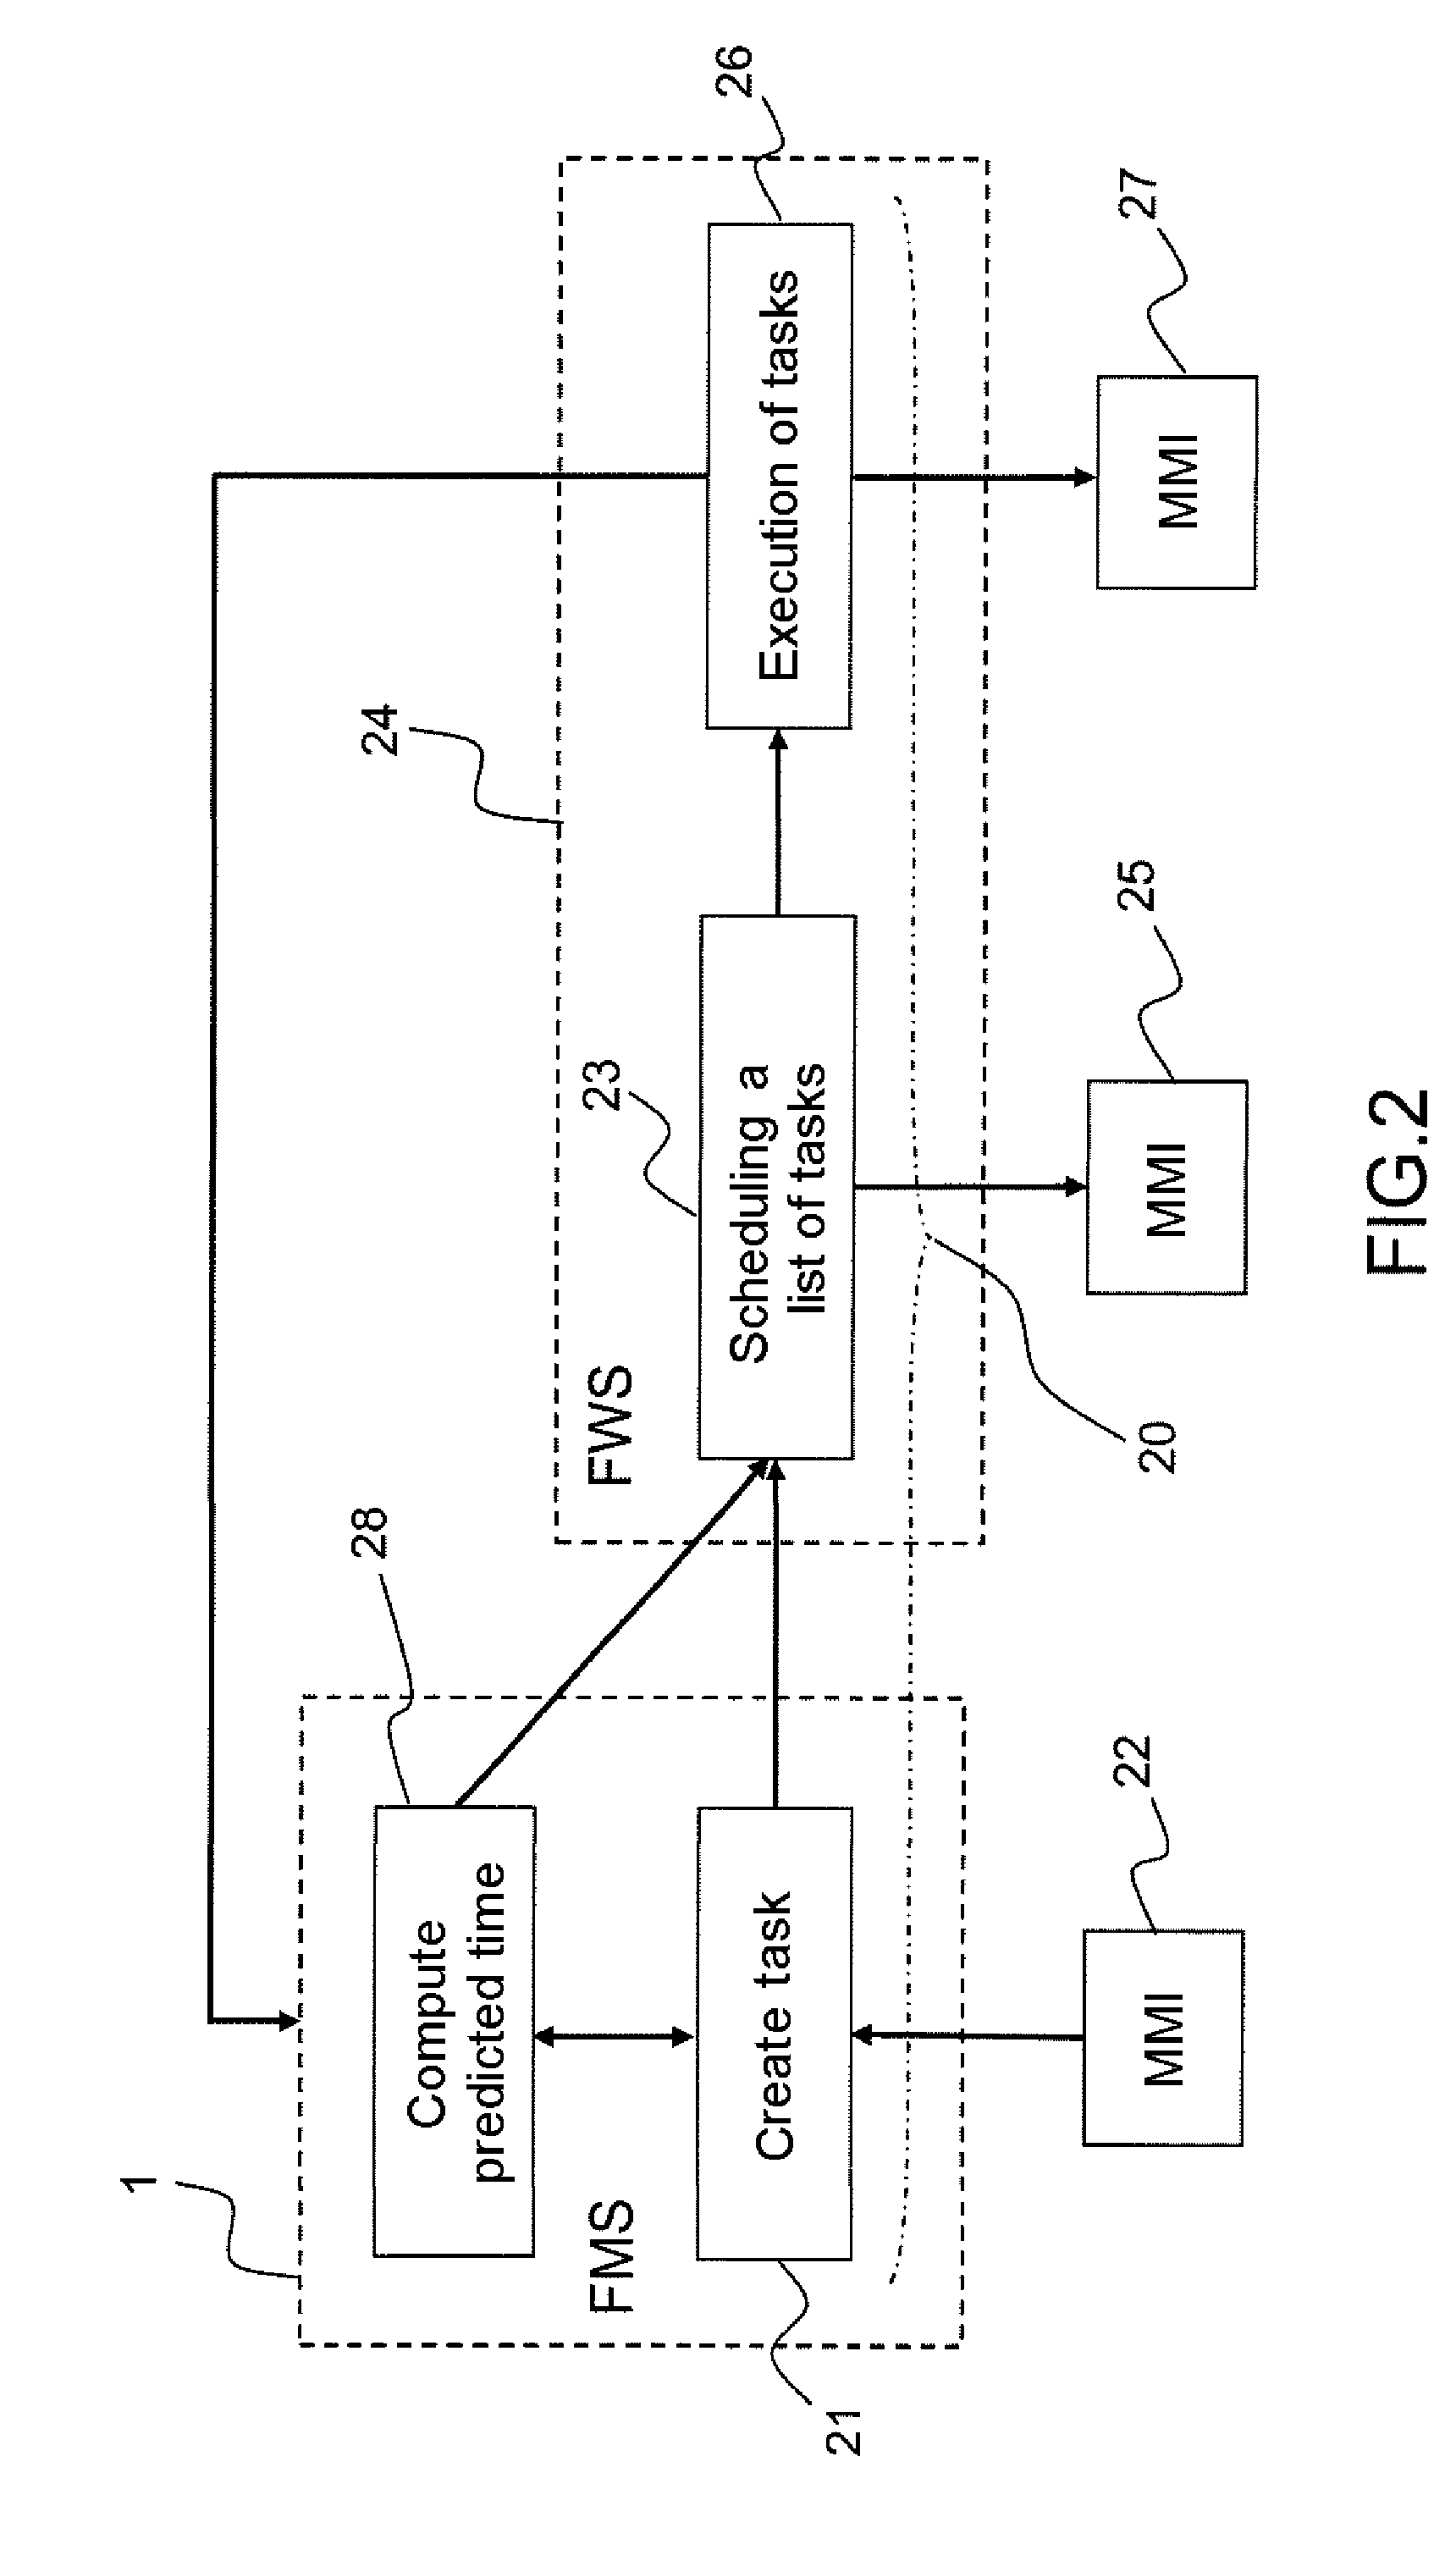 Method and device for centralized management of tasks to be carried out by a crew of an aircraft during flight